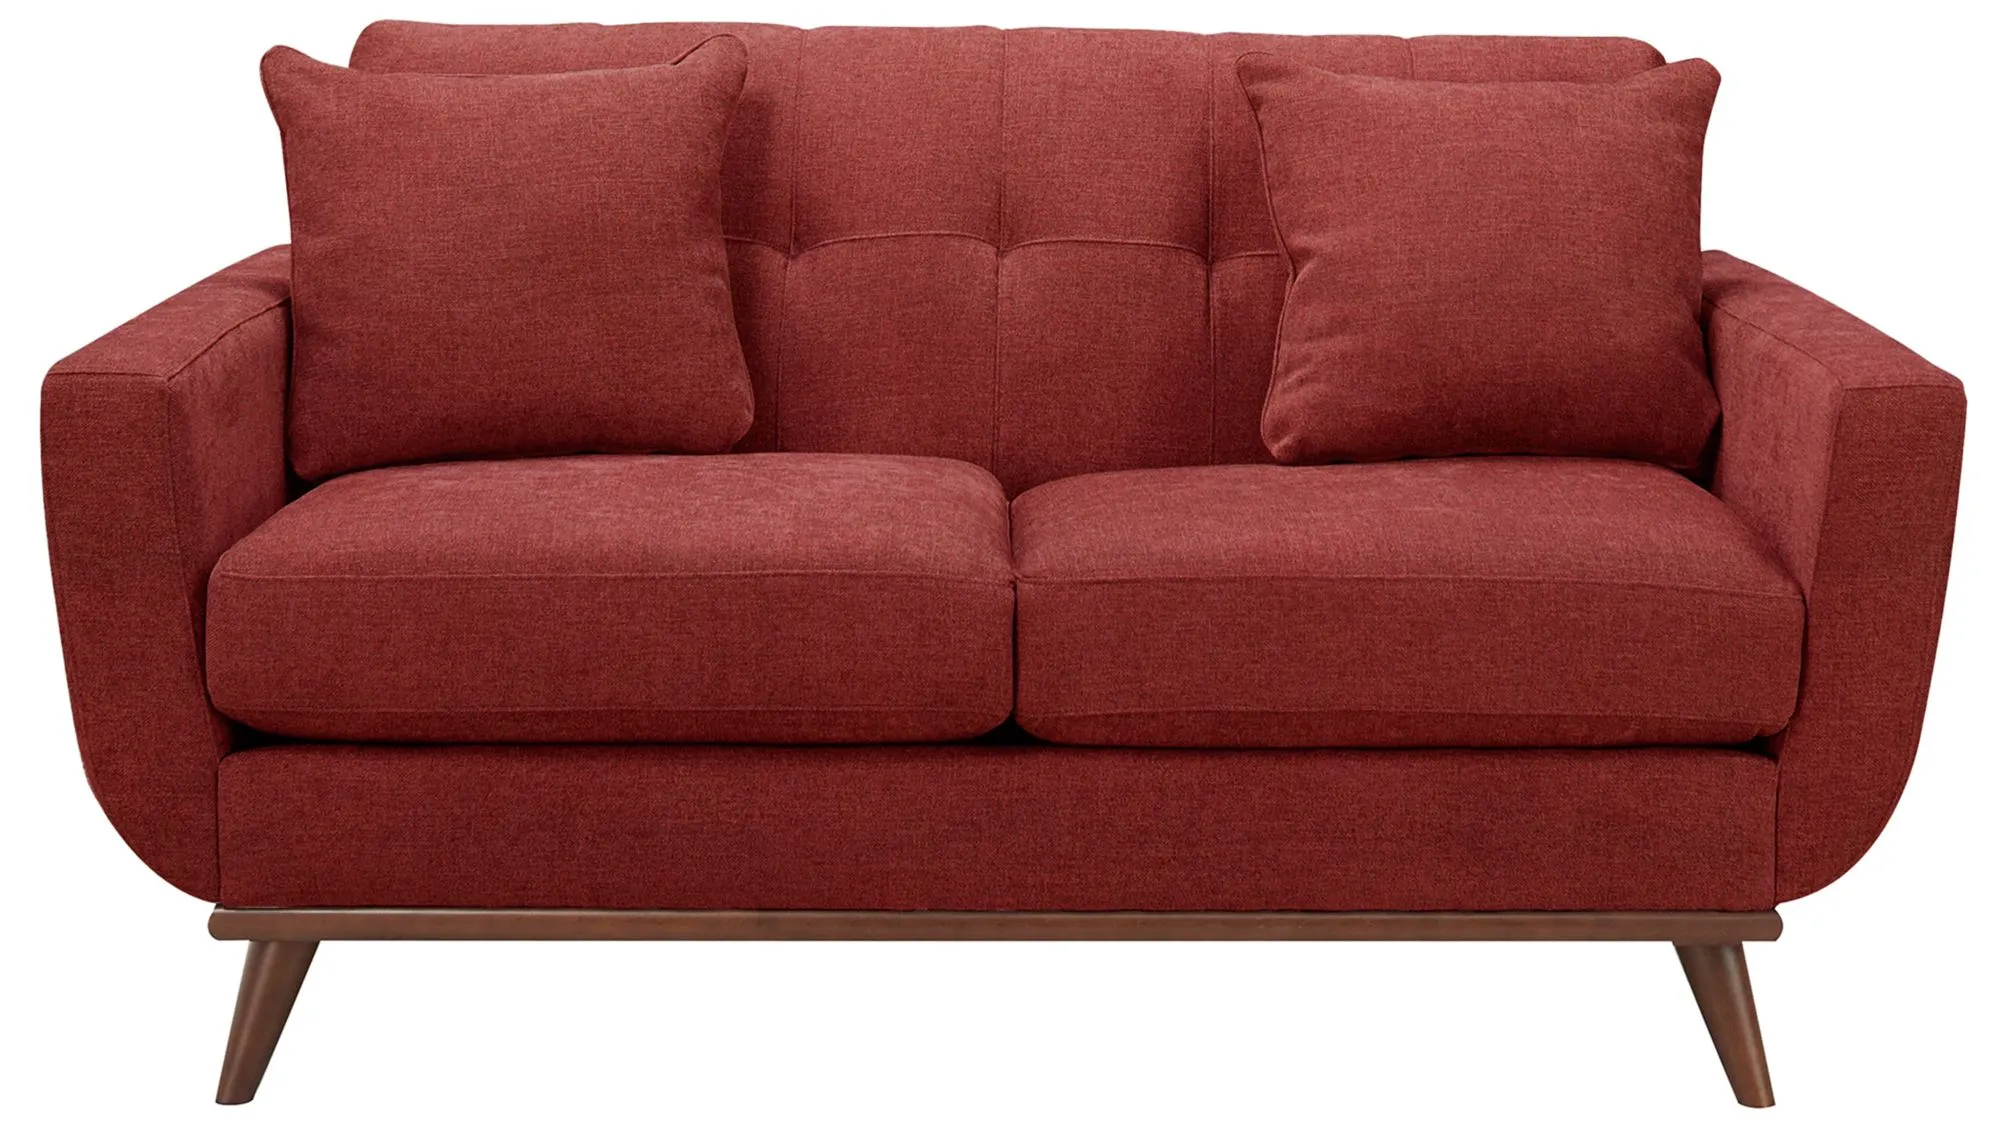 Milo Loveseat in Suede-So-Soft Cardinal by H.M. Richards